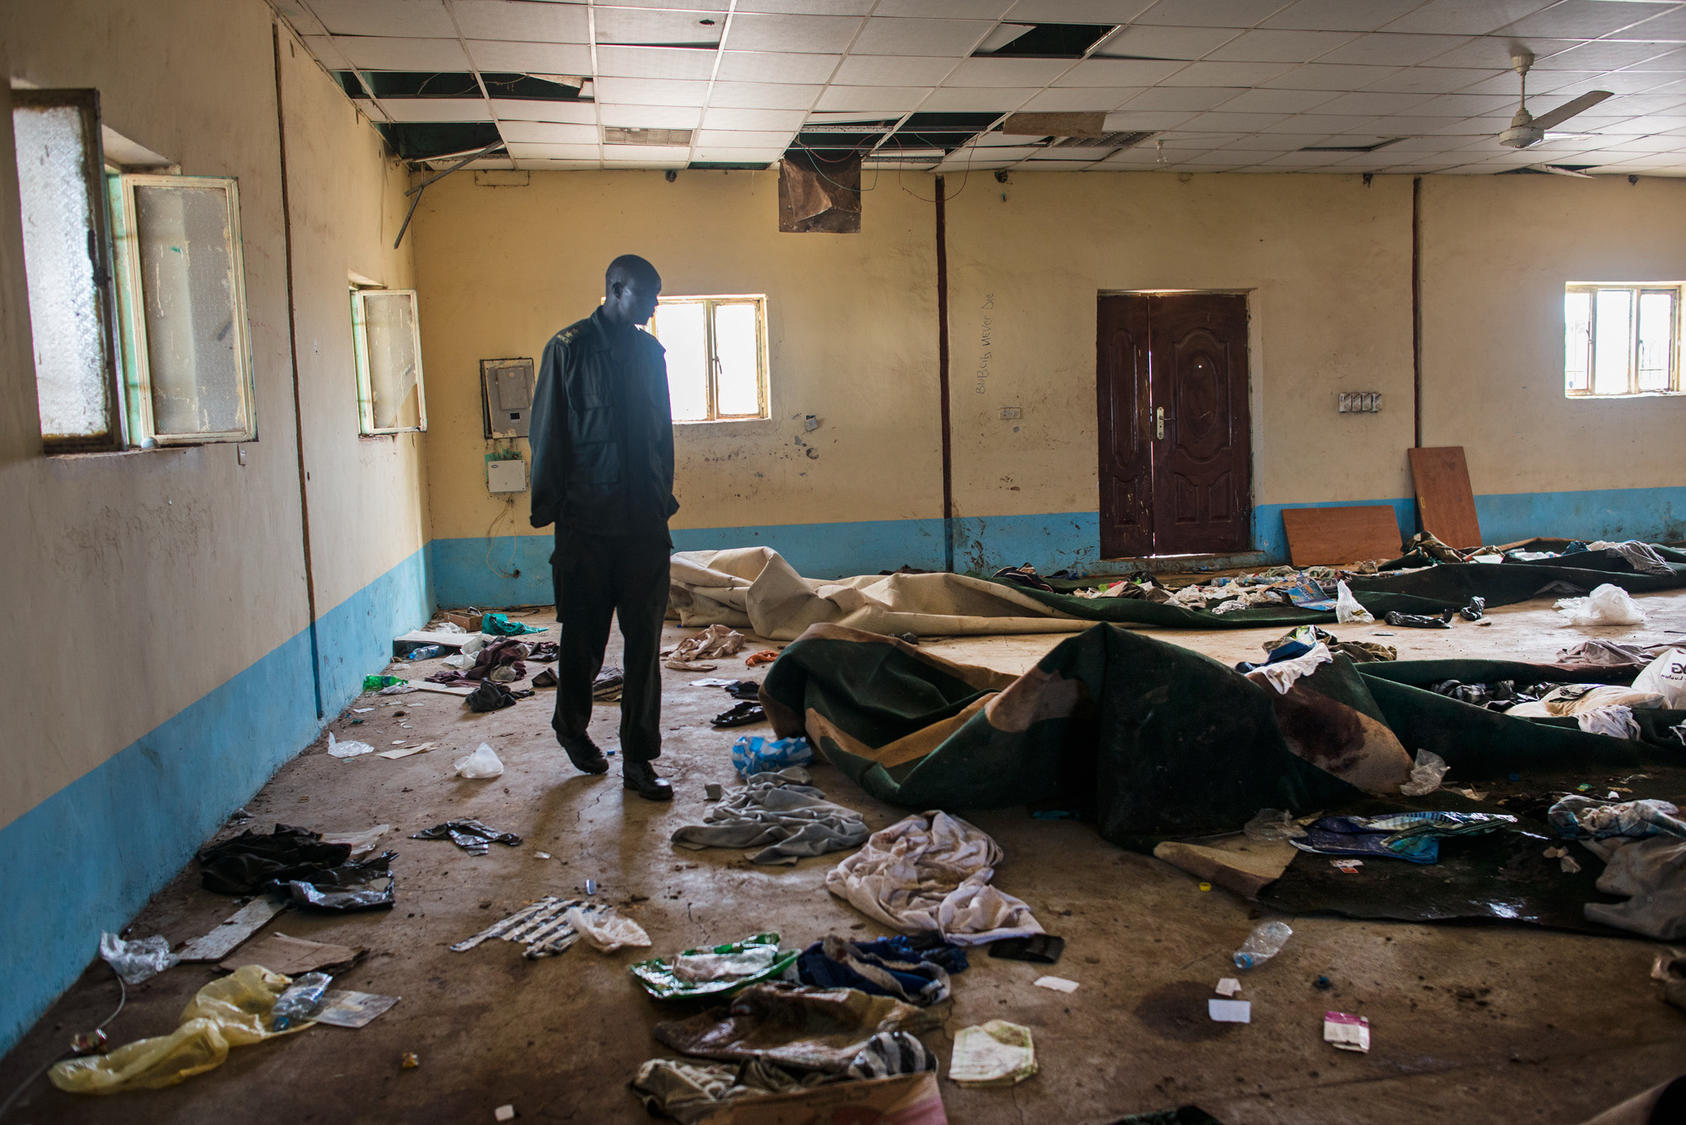 An opposition soldier walks through the remnants of a mosque in Bentiu, South South Sudan, where hundreds of people were killed while taking refuge from the fighting, May 3, 2014. Photo Courtesy of The New York Times/Lynsey Addario